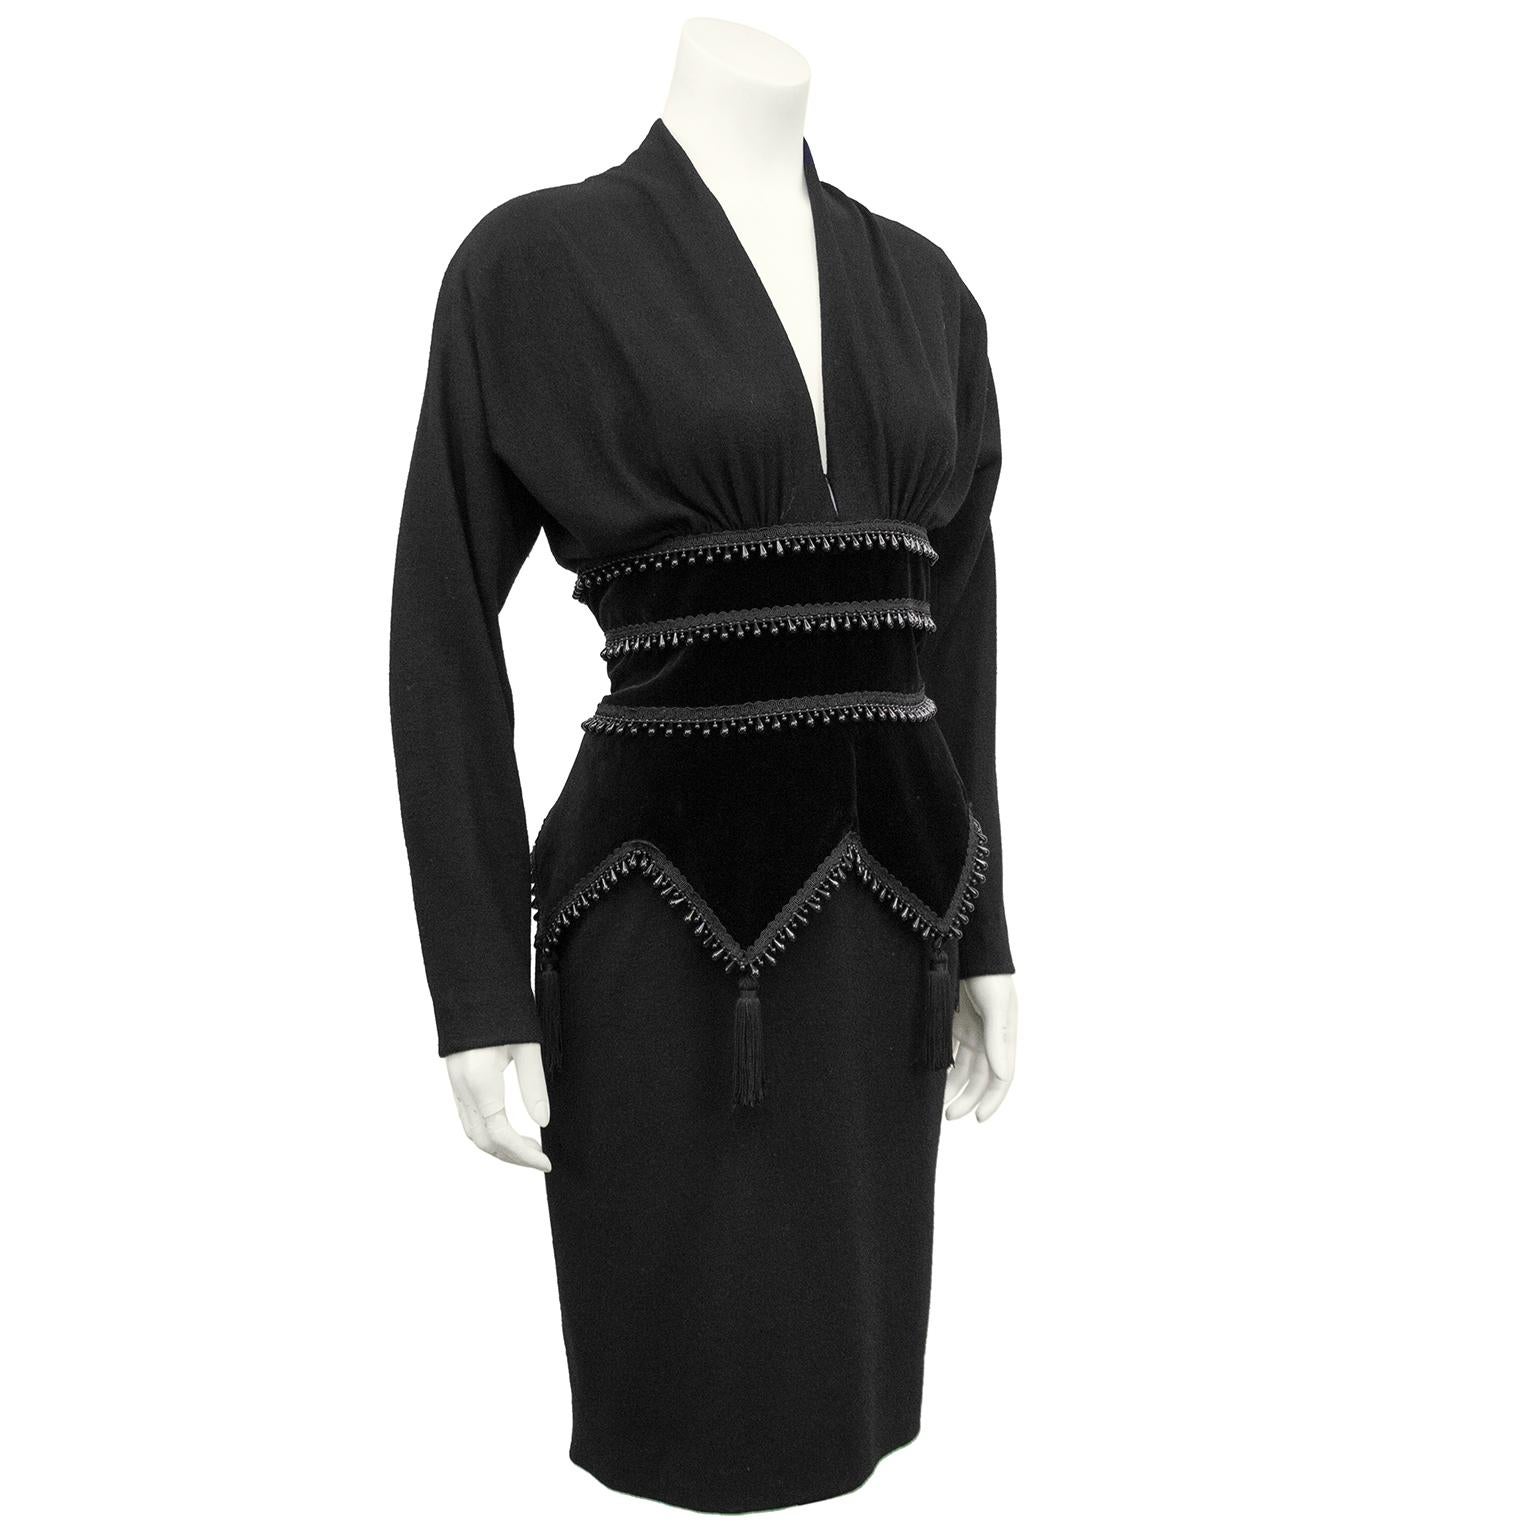 1980s Isabelle Allard black wool and velvet corset style cocktail dress. Deep v neckline with long dolman sleeves. Neckline is tacked at bottom to create a small keyhole feature. Waist features jet black cut velvet peplum-like detail with a chevron